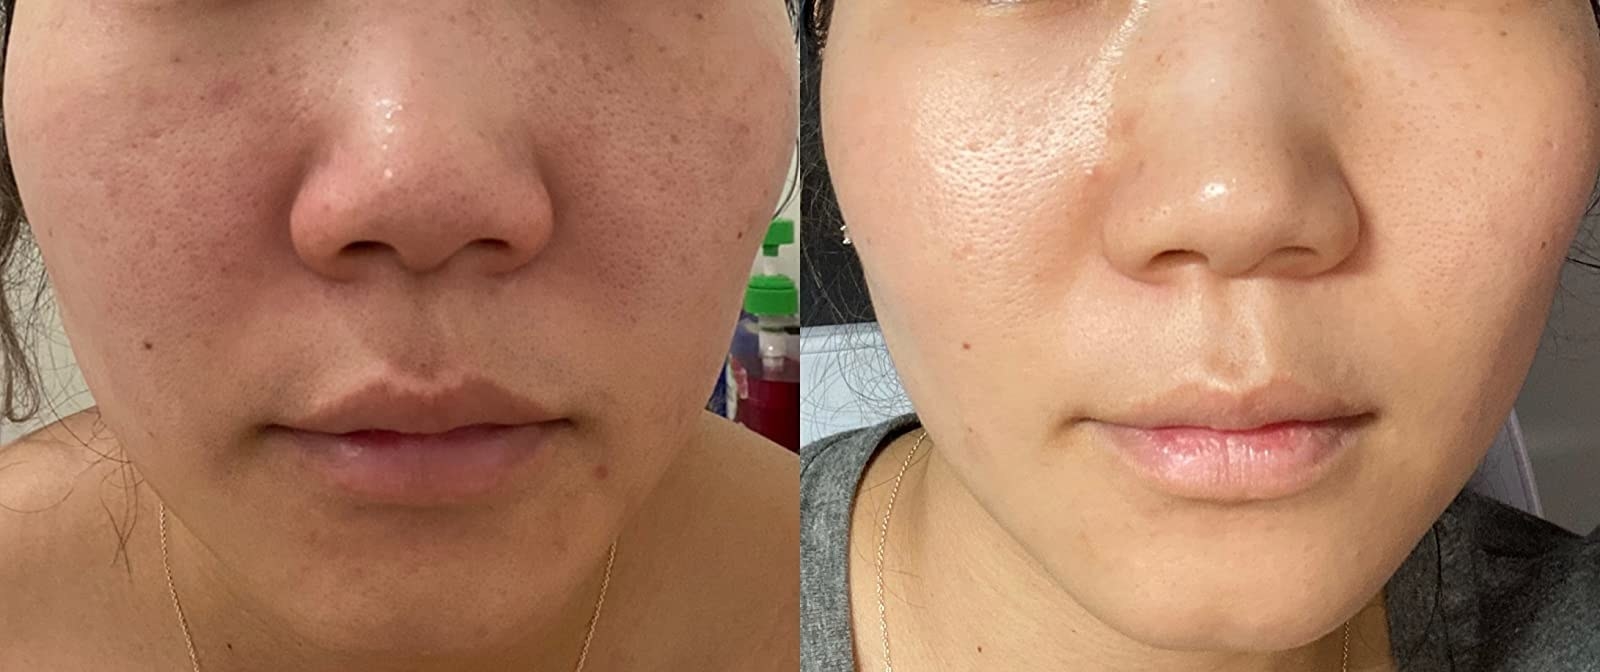 A reviewer sharing a before and after of their skin